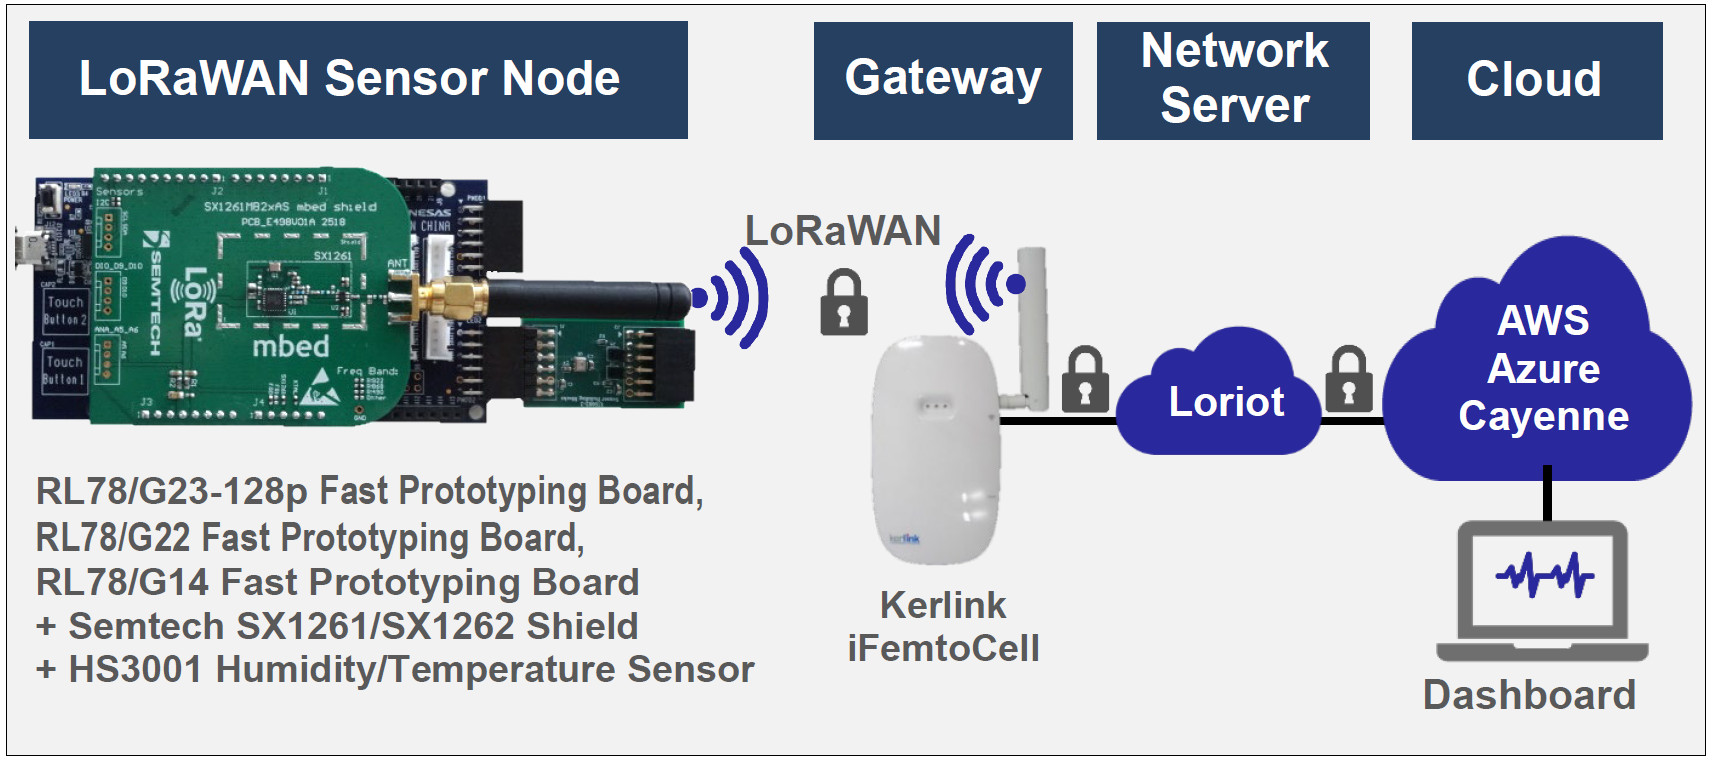 Visualize sensor data transmitted by the RL78 Sensor Node to the Cloud